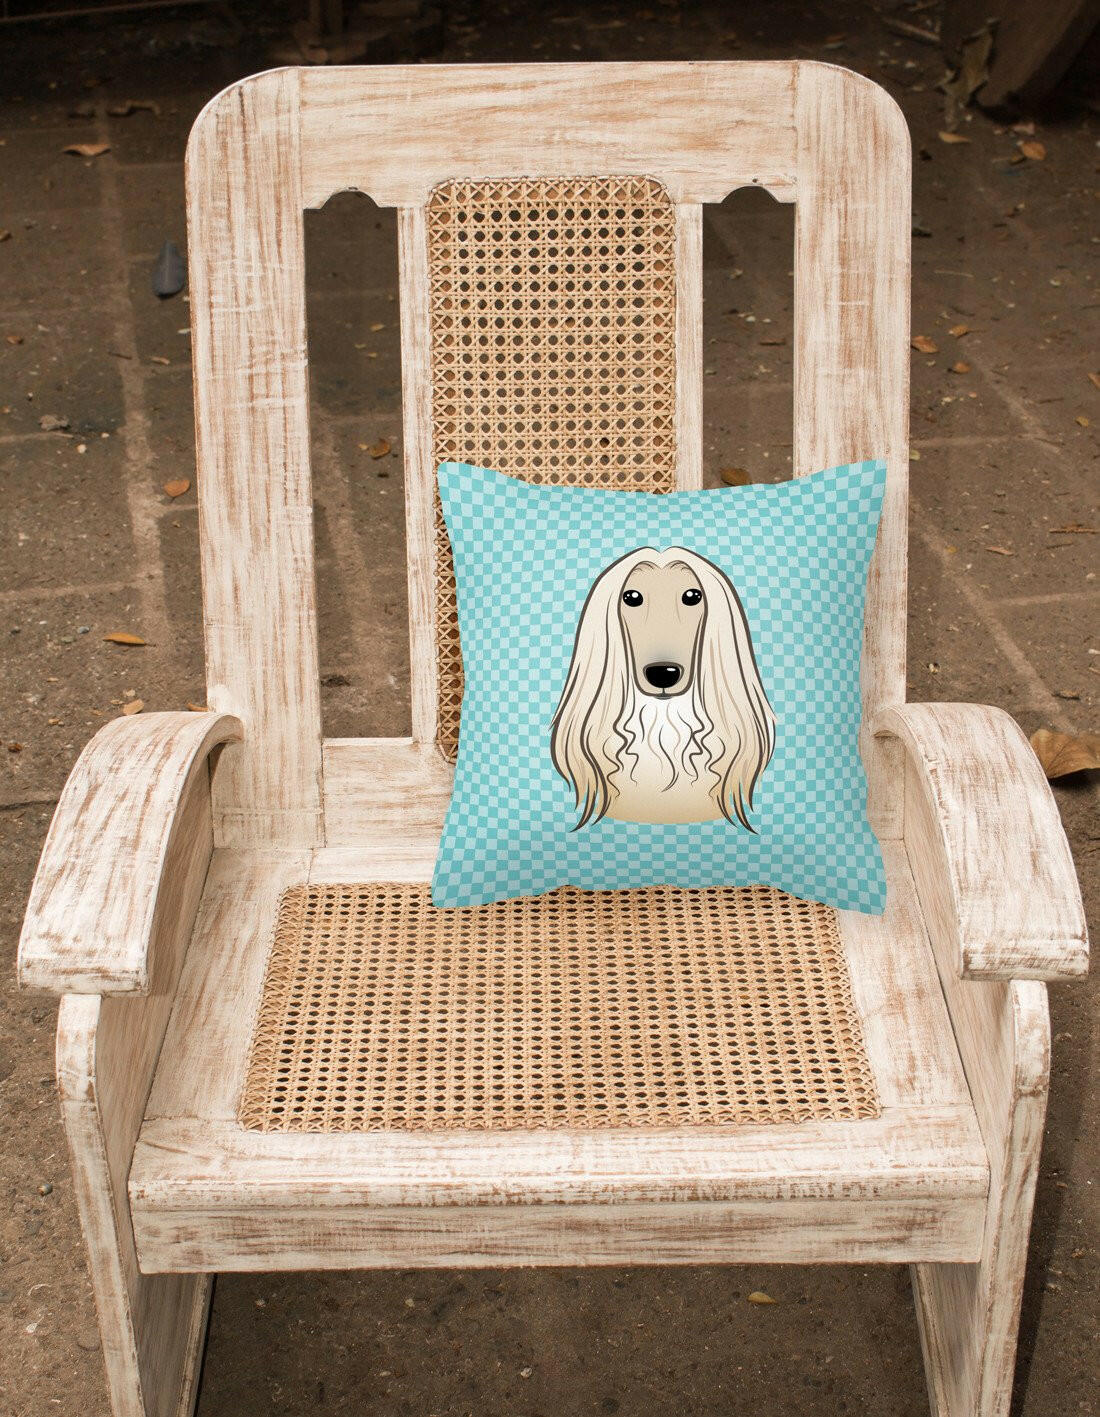 Checkerboard Blue Afghan Hound Canvas Fabric Decorative Pillow BB1182PW1414 - the-store.com